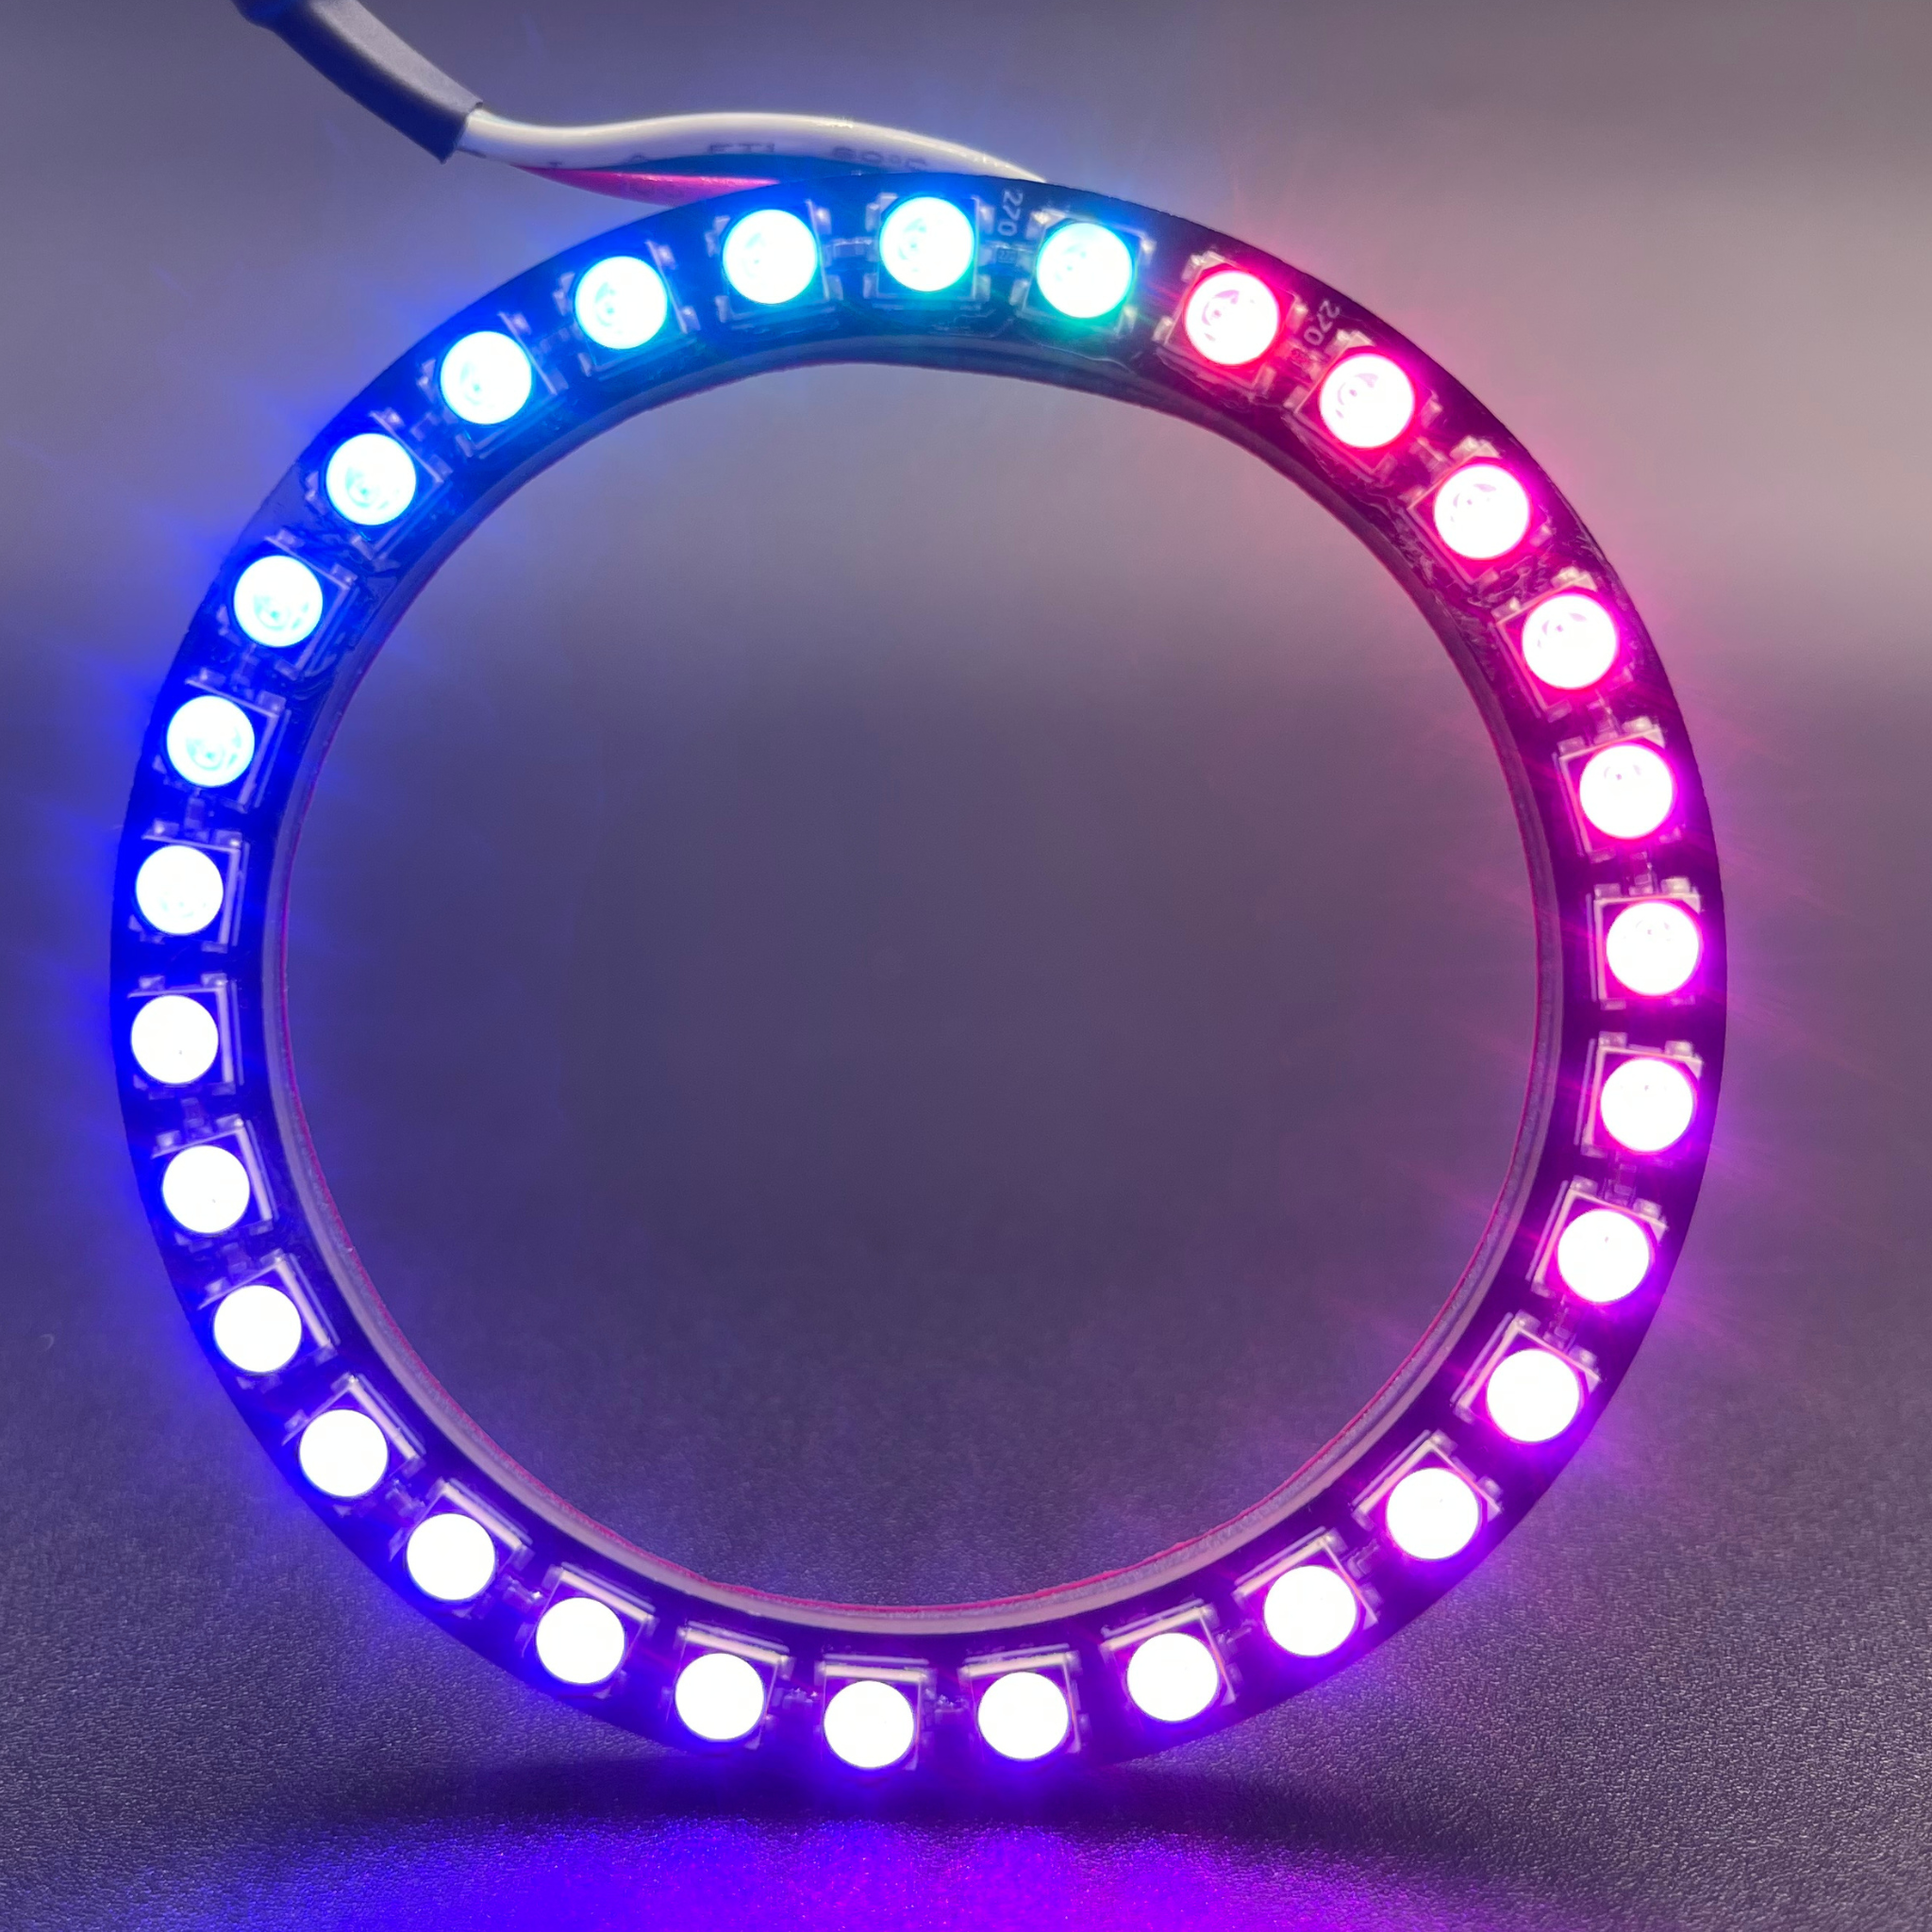 1994-2004 Ford Mustang Multicolor Halo Kit - RGB Halo Kits Multicolor Flow Series Color Chasing RGBWA LED headlight kit Colorshift Oracle Lighting Trendz OneUpLighting Morimoto theretrofitsource AutoLEDTech Diode Dynamics